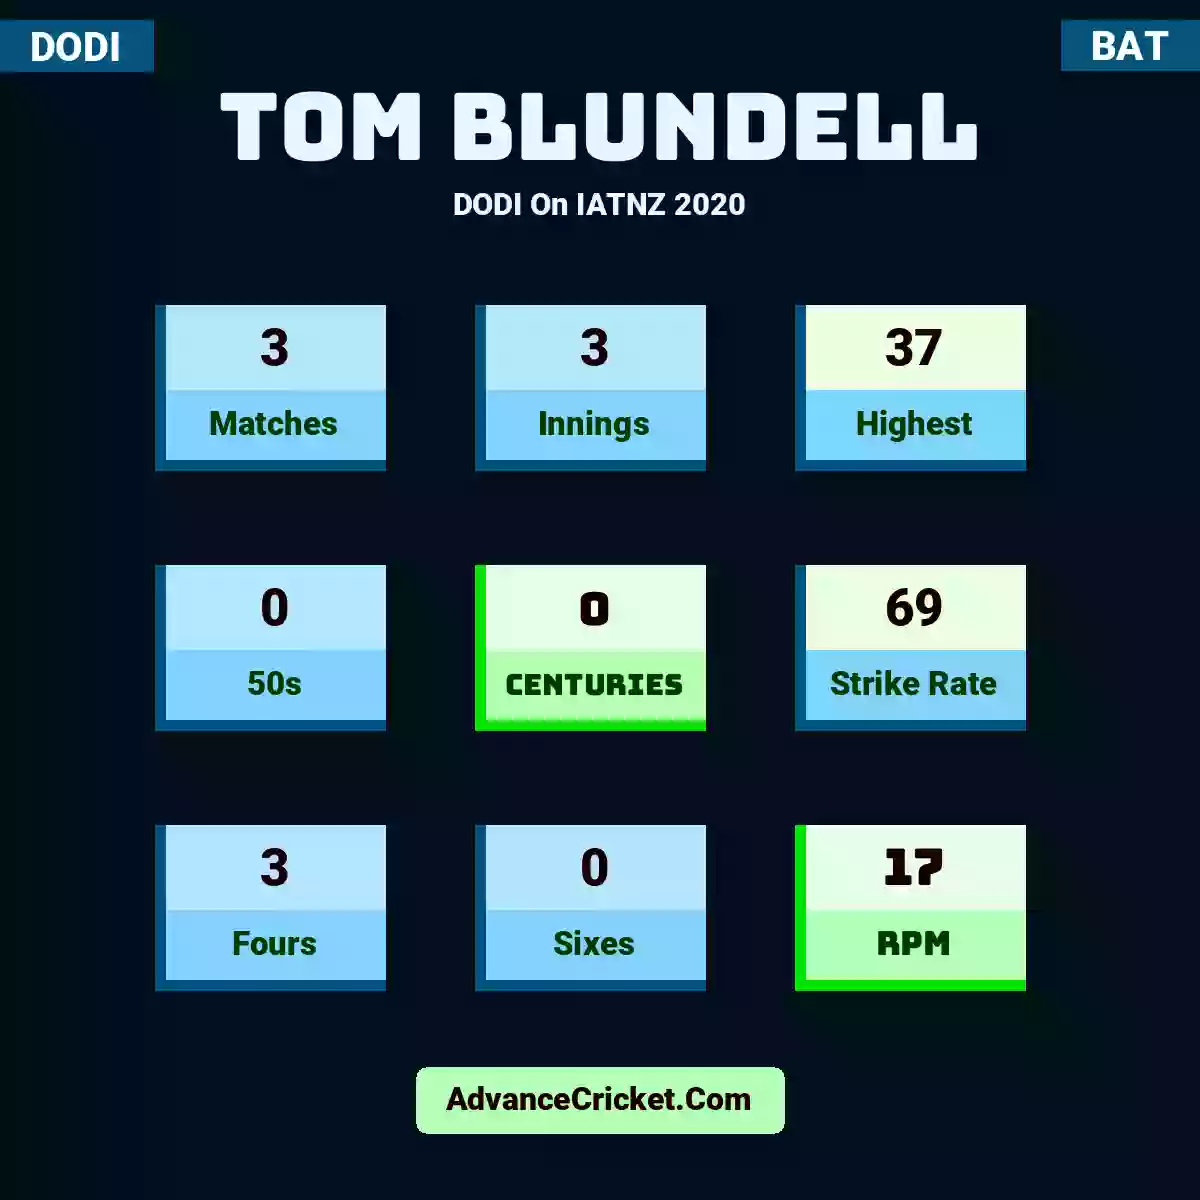 Tom Blundell DODI  On IATNZ 2020, Tom Blundell played 3 matches, scored 37 runs as highest, 0 half-centuries, and 0 centuries, with a strike rate of 69. T.Blundell hit 3 fours and 0 sixes, with an RPM of 17.